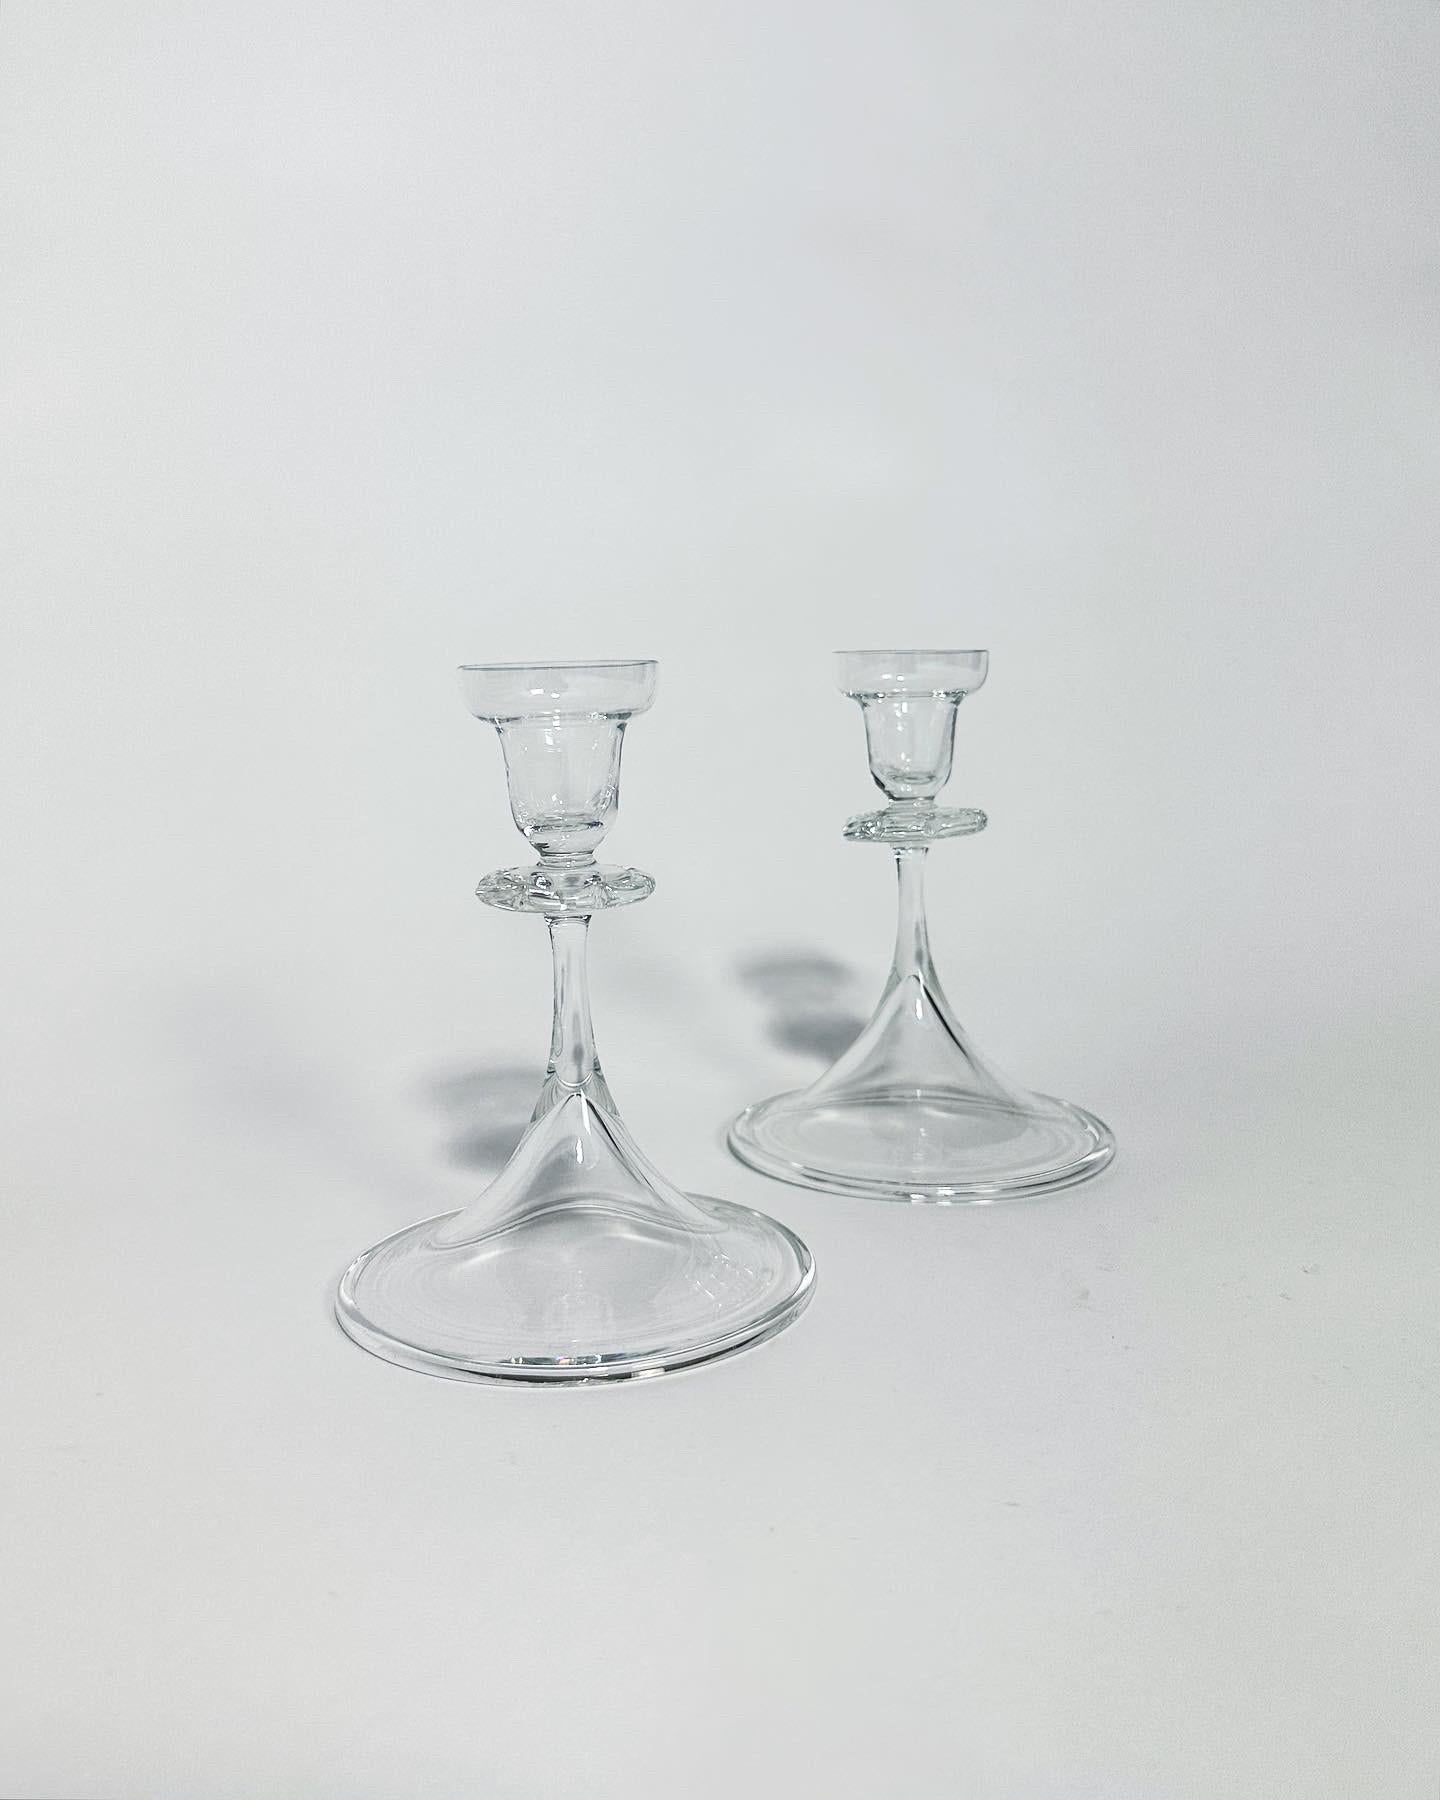 Rare pair of Nils Landberg crystal candle holders for Sandvik/ Orrefors, model No. NS 1612, hand-crafted in Sweden in the 1930s.

Very good condition with minor signs of use and age.

Height: 13 cm
Diameter: 11 cm

For standard candles with a